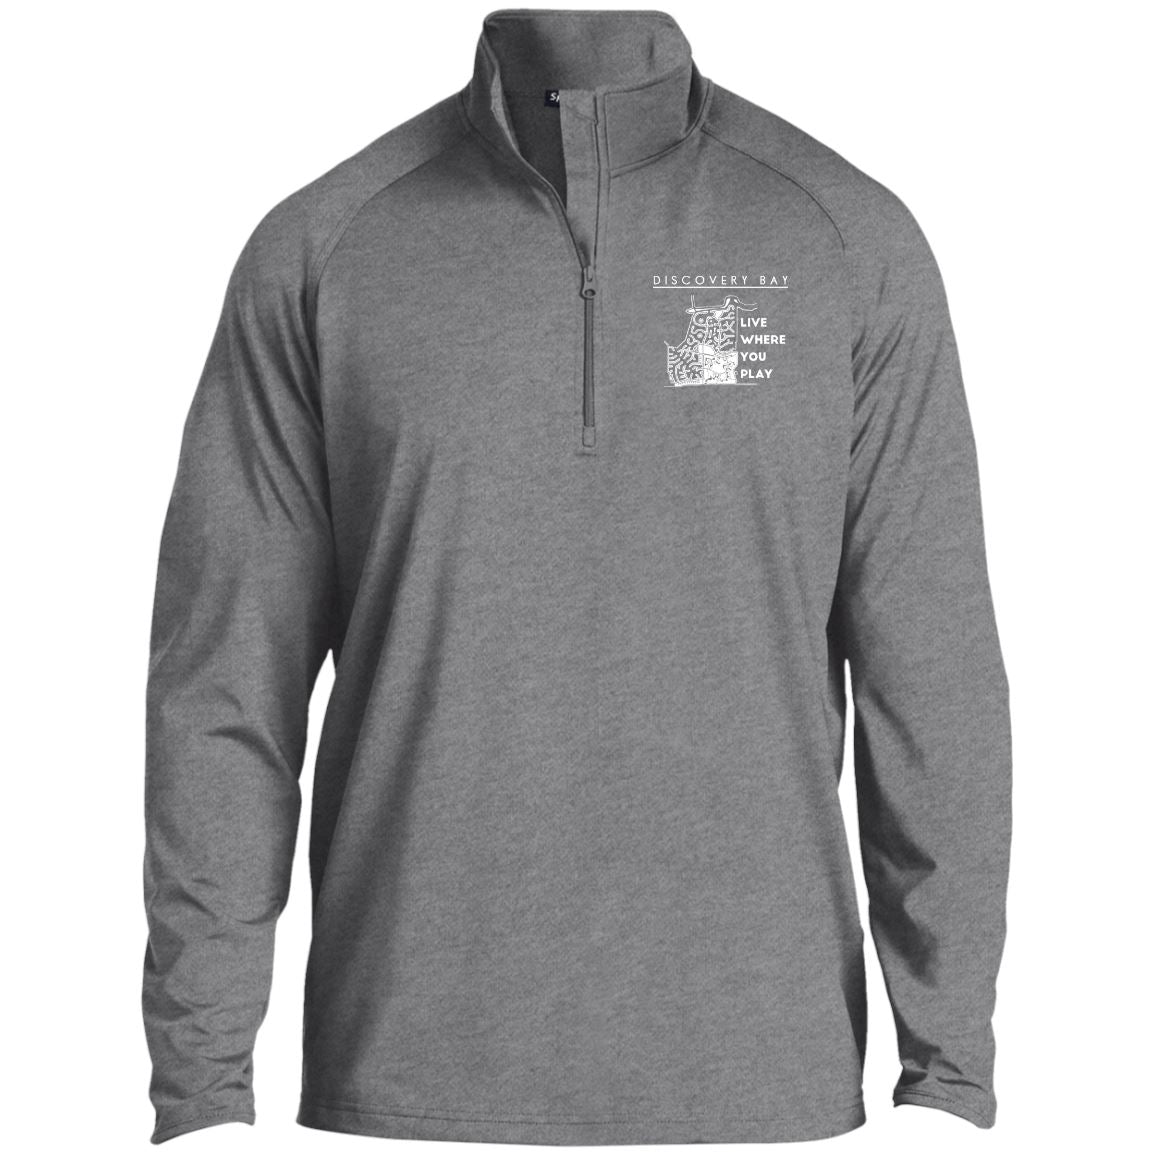 Discovery Bay Embroidered Sport-Tek 1/2 Zip Raglan Performance Pullover - Houseboat Kings